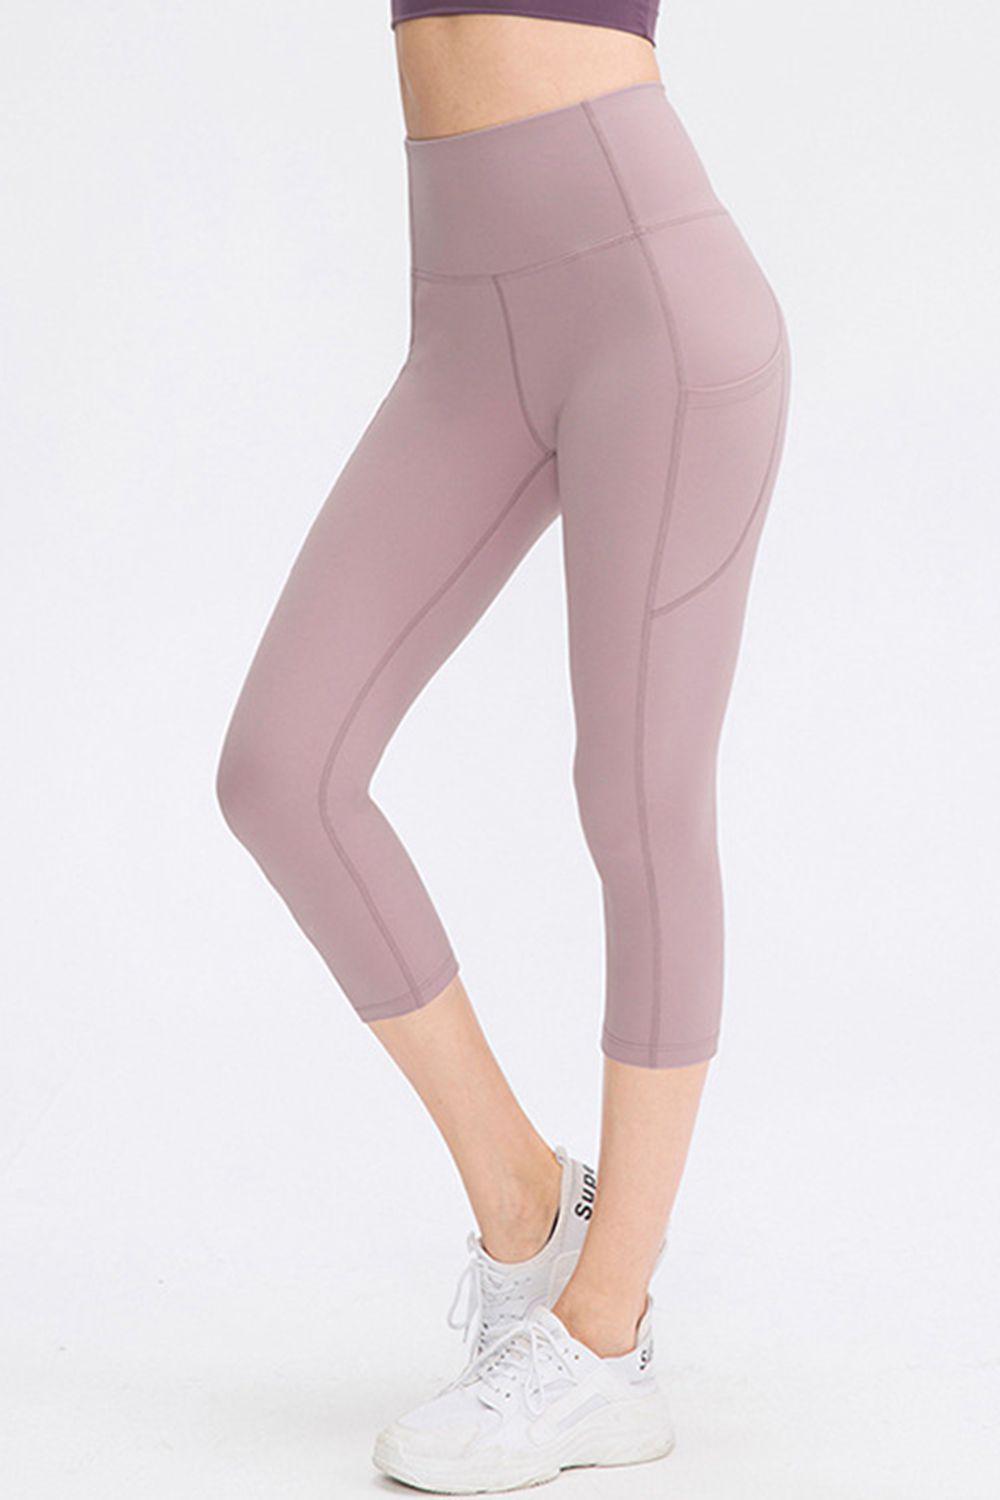 Wide Waistband Cropped Active Leggings with Pockets BLUE ZONE PLANET